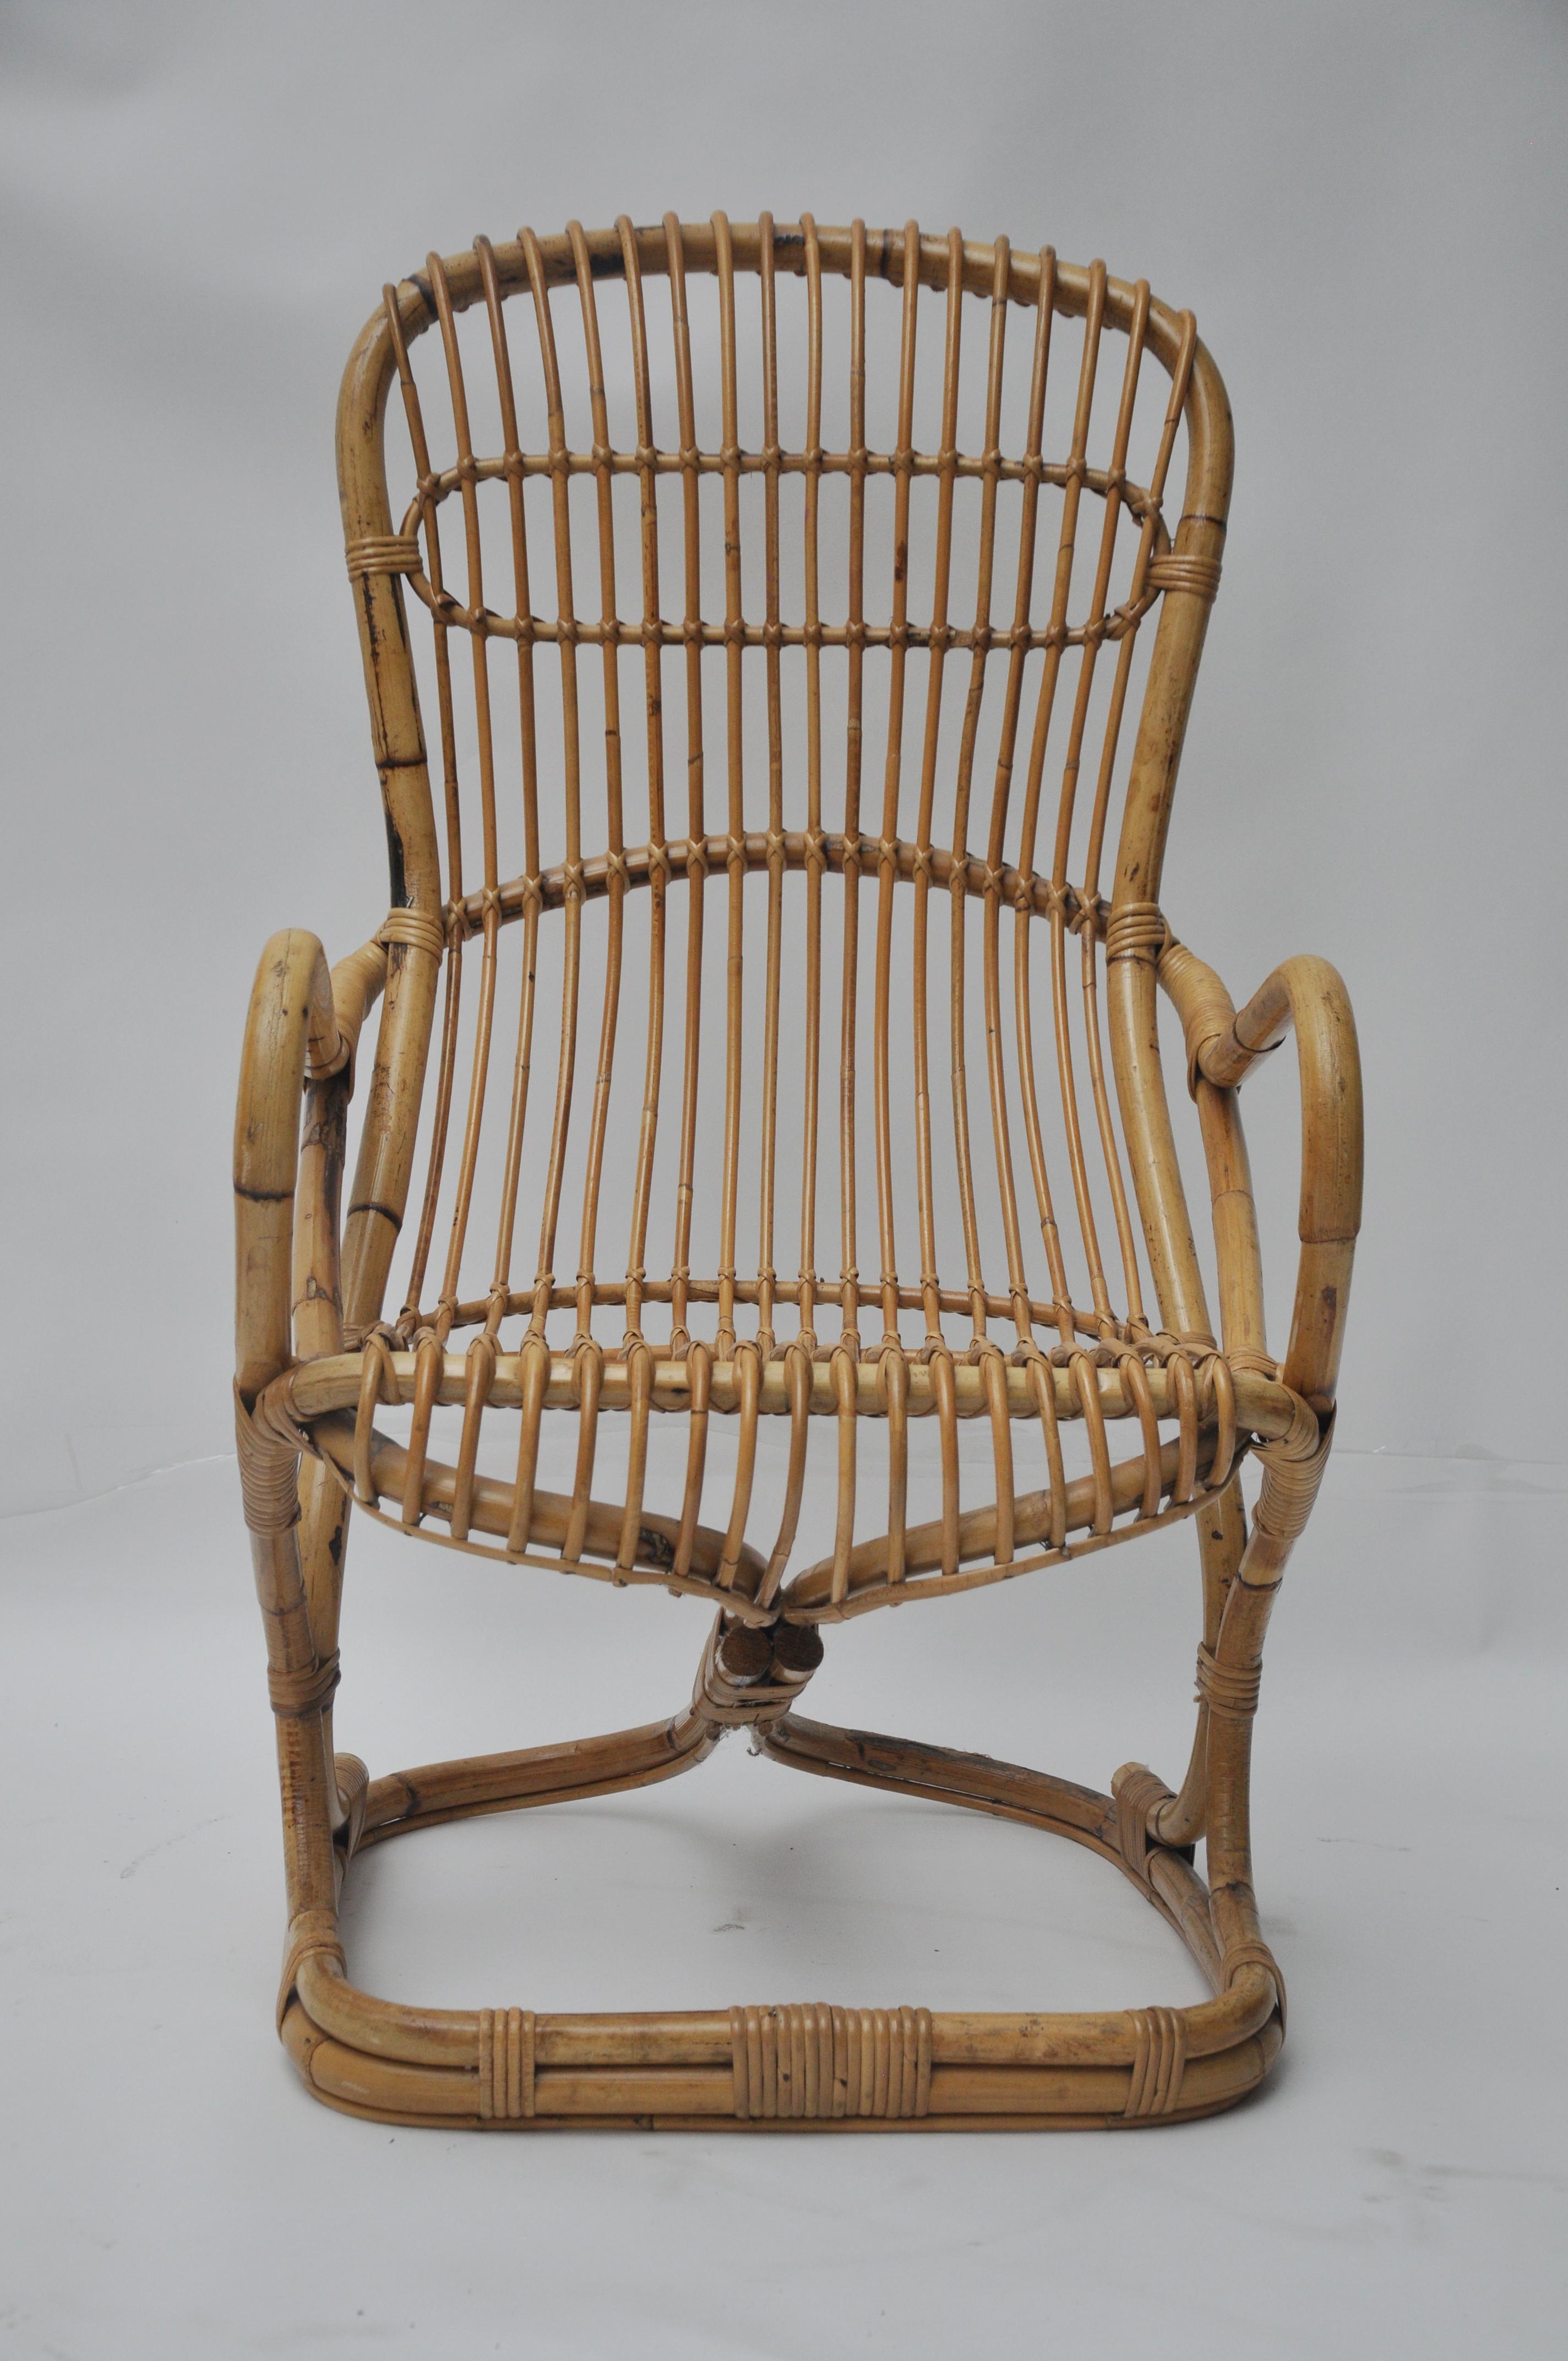 Single midcentury bamboo / rattan lounge chair with arms. High back good original condition with visible patina and minimal rattan loss. This is in the style of Franco Albini. Seat height is 17